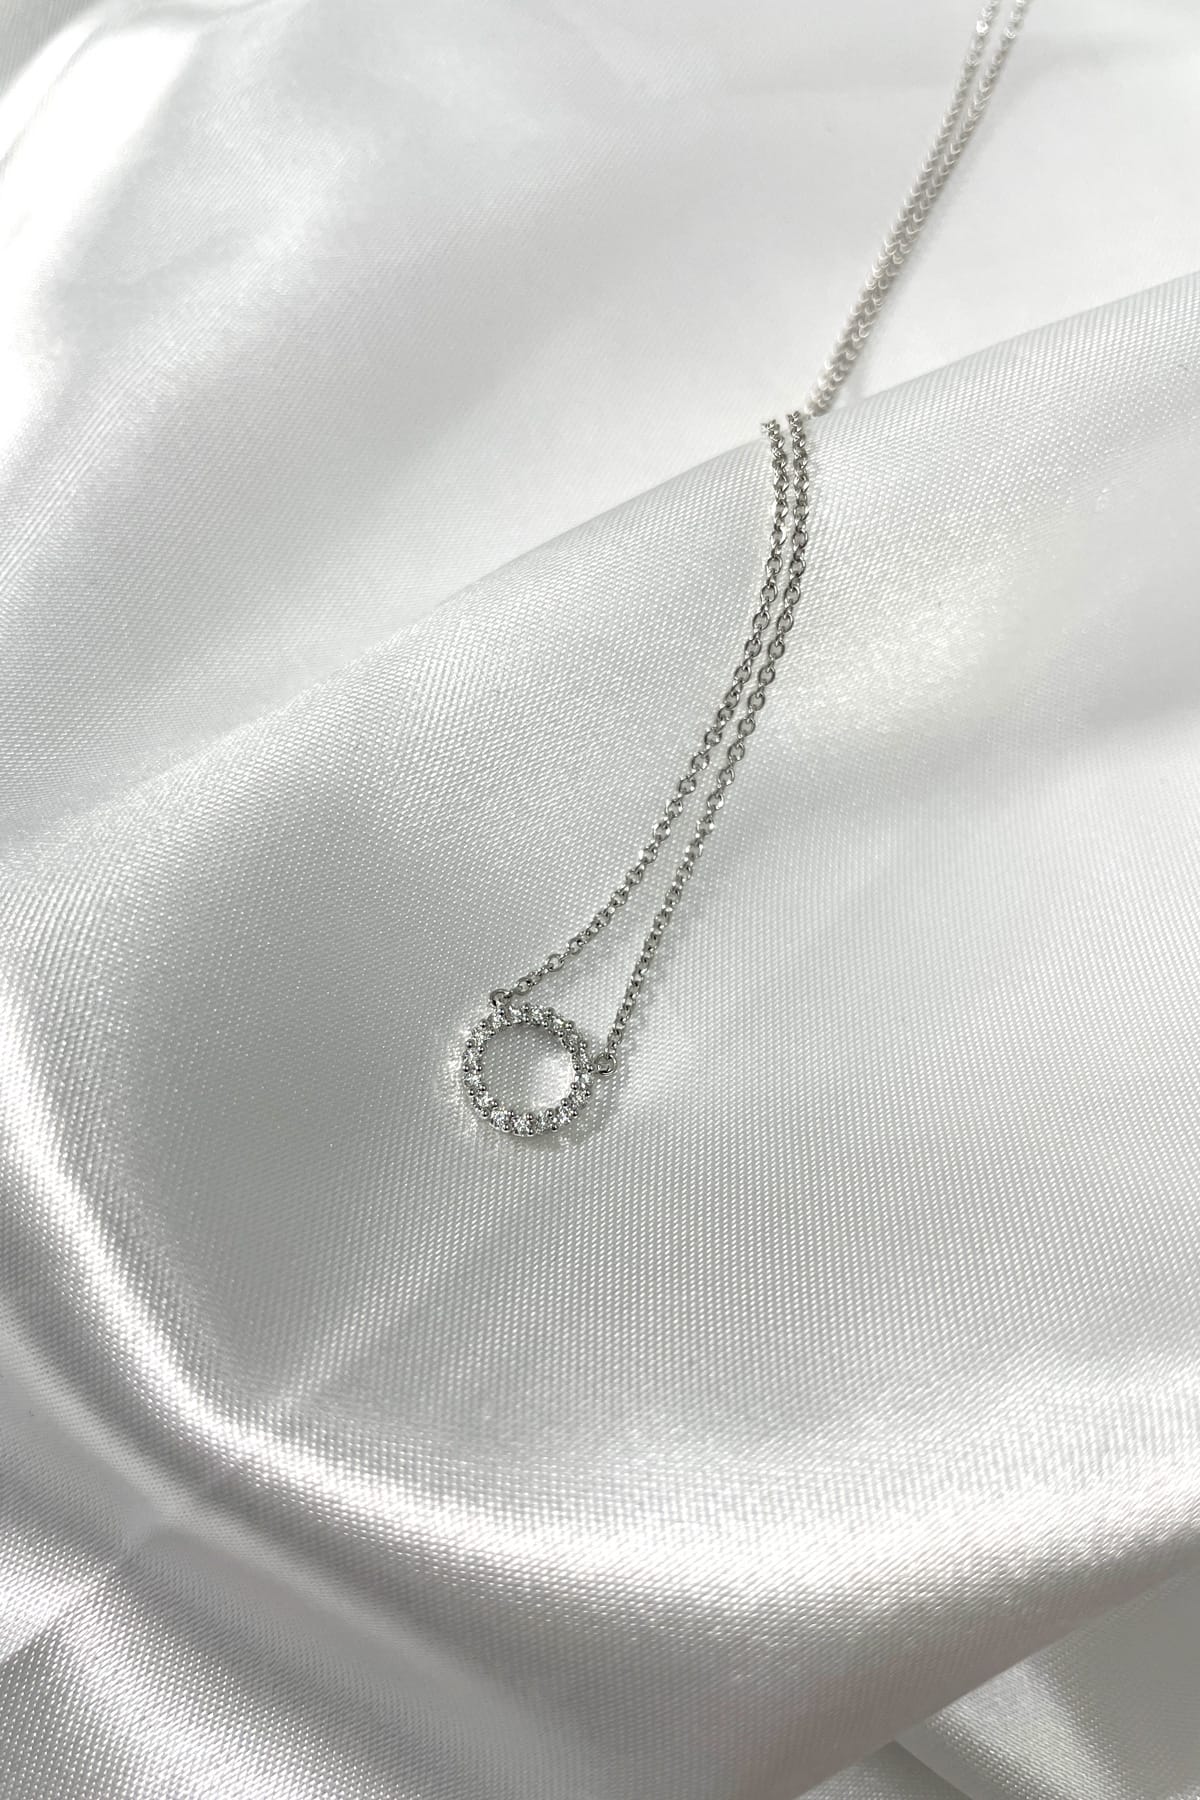 18 Carat White Gold Signature Circle Pendant From Hearts On Fire available at LeGassick Diamonds and Jewellery Gold Coast, Australia.